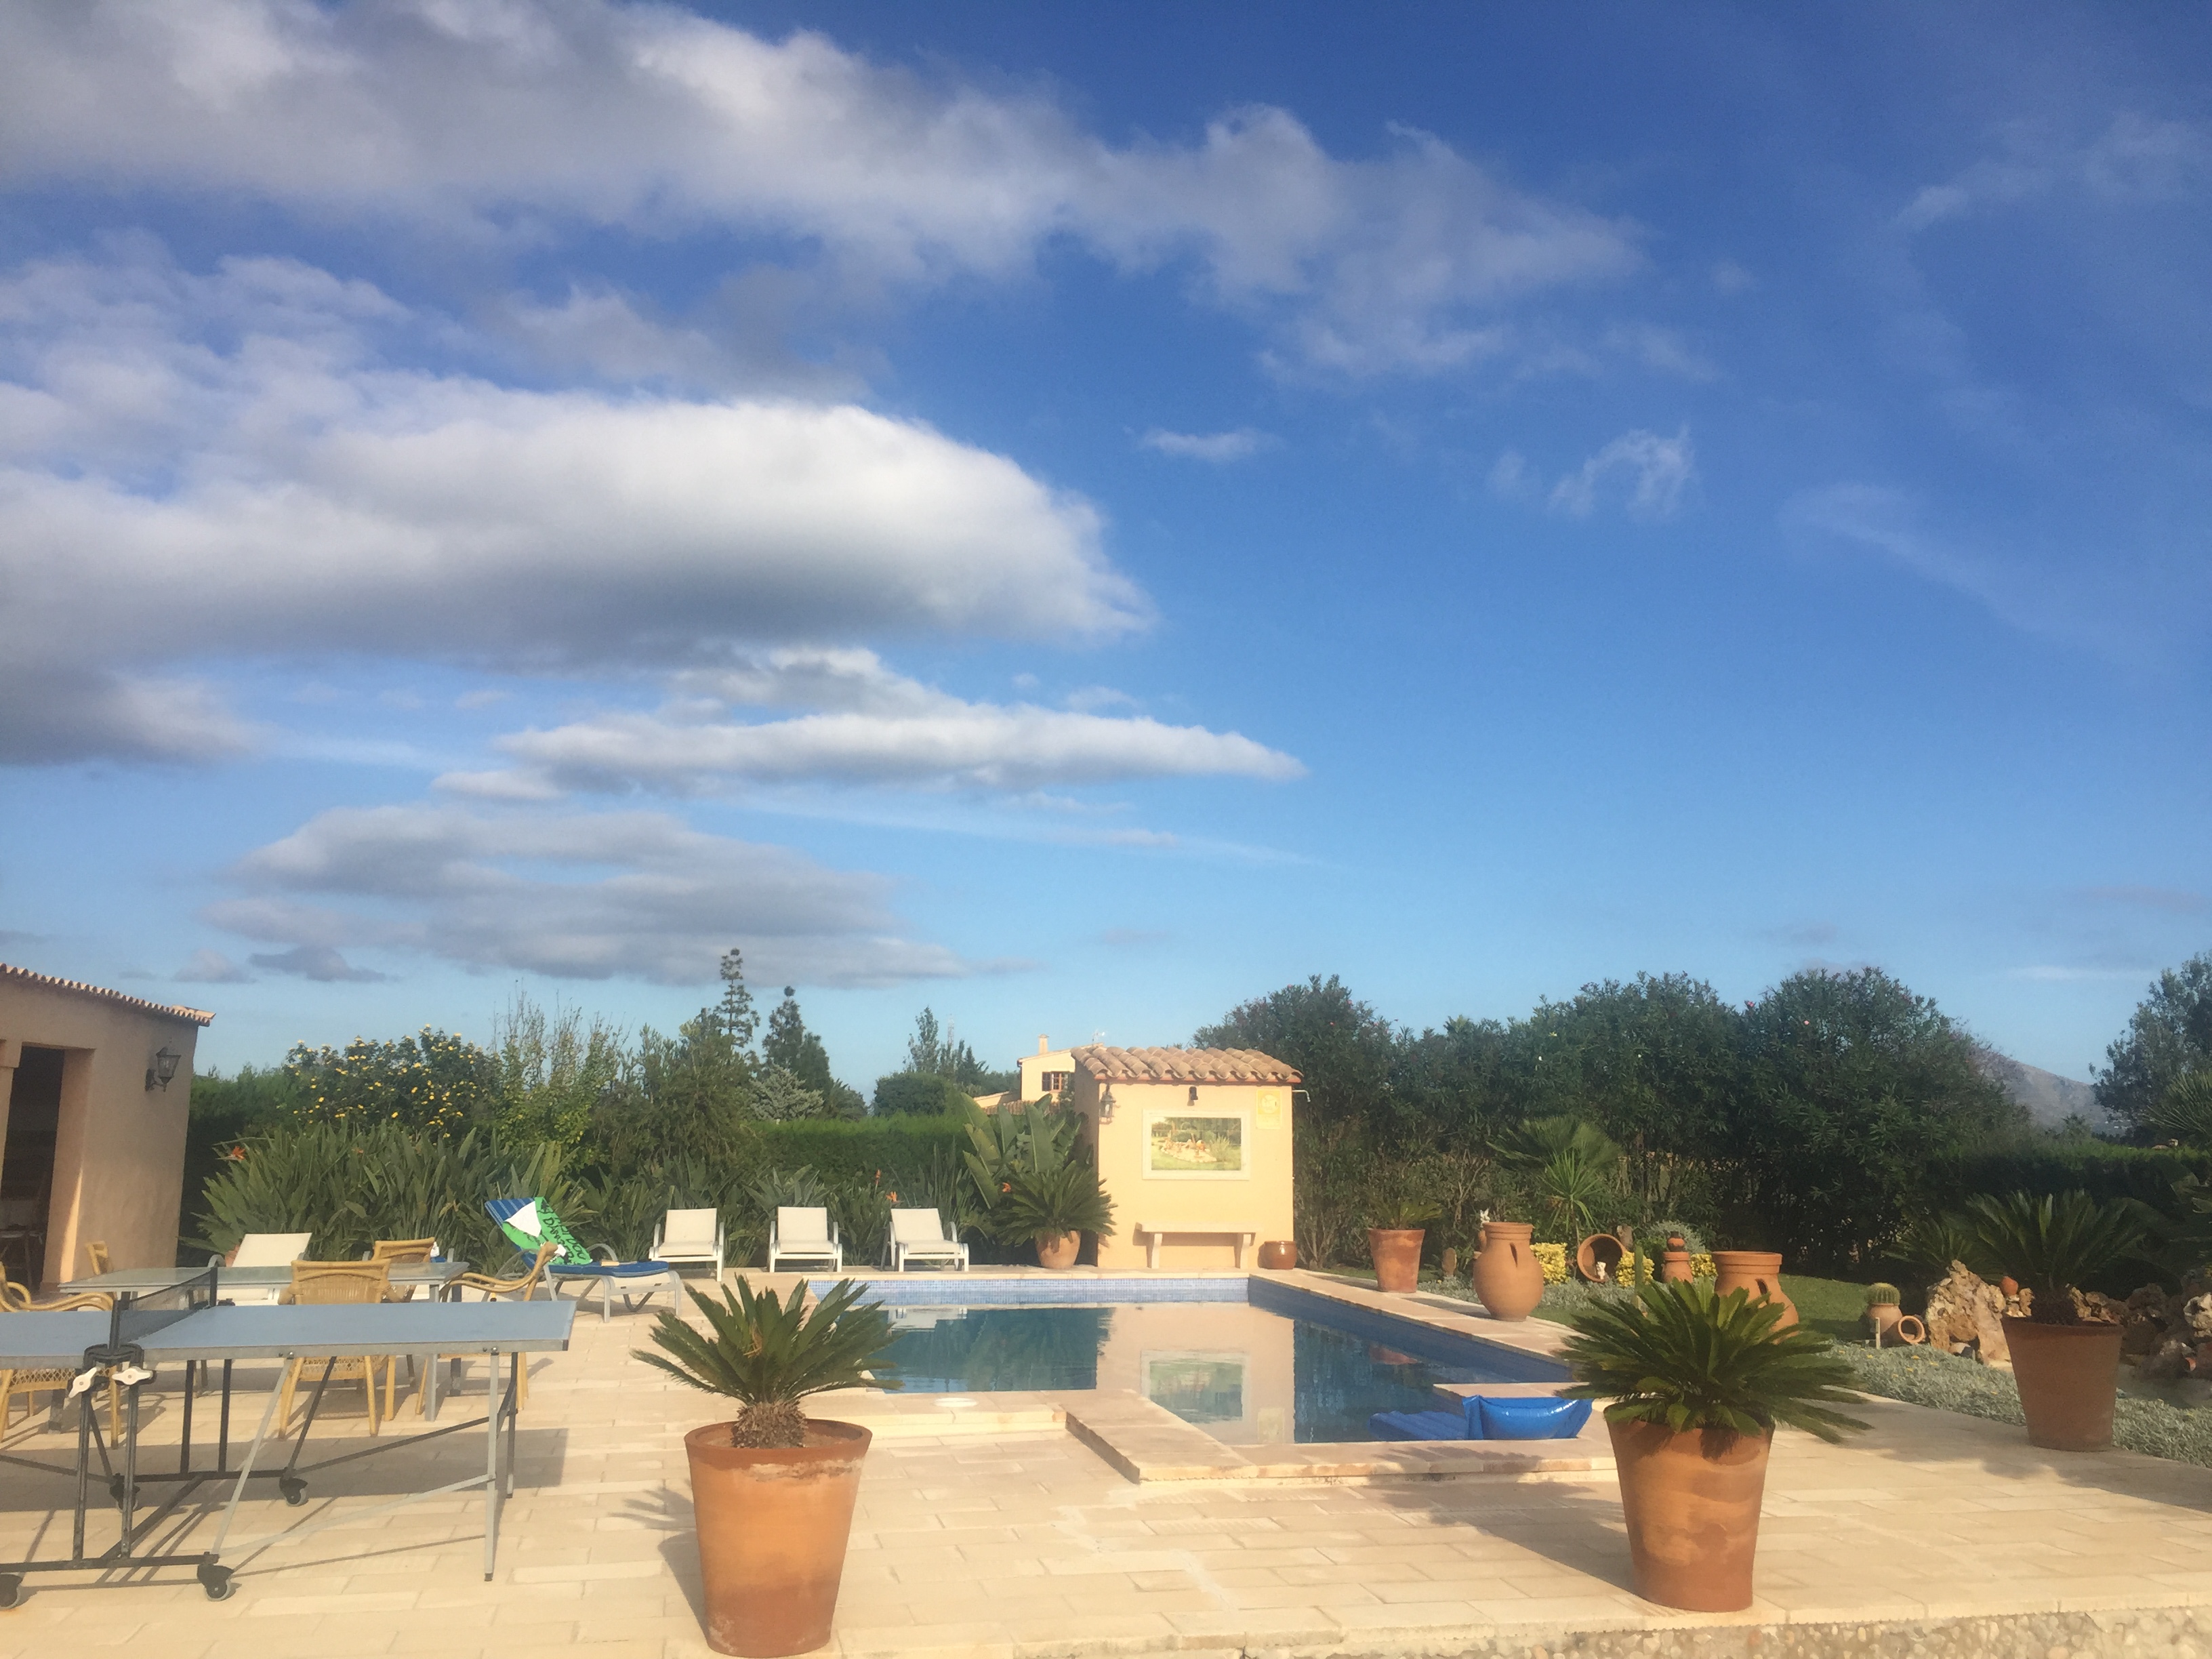 An October stay at a luxury Travelopo villa in Mallorca